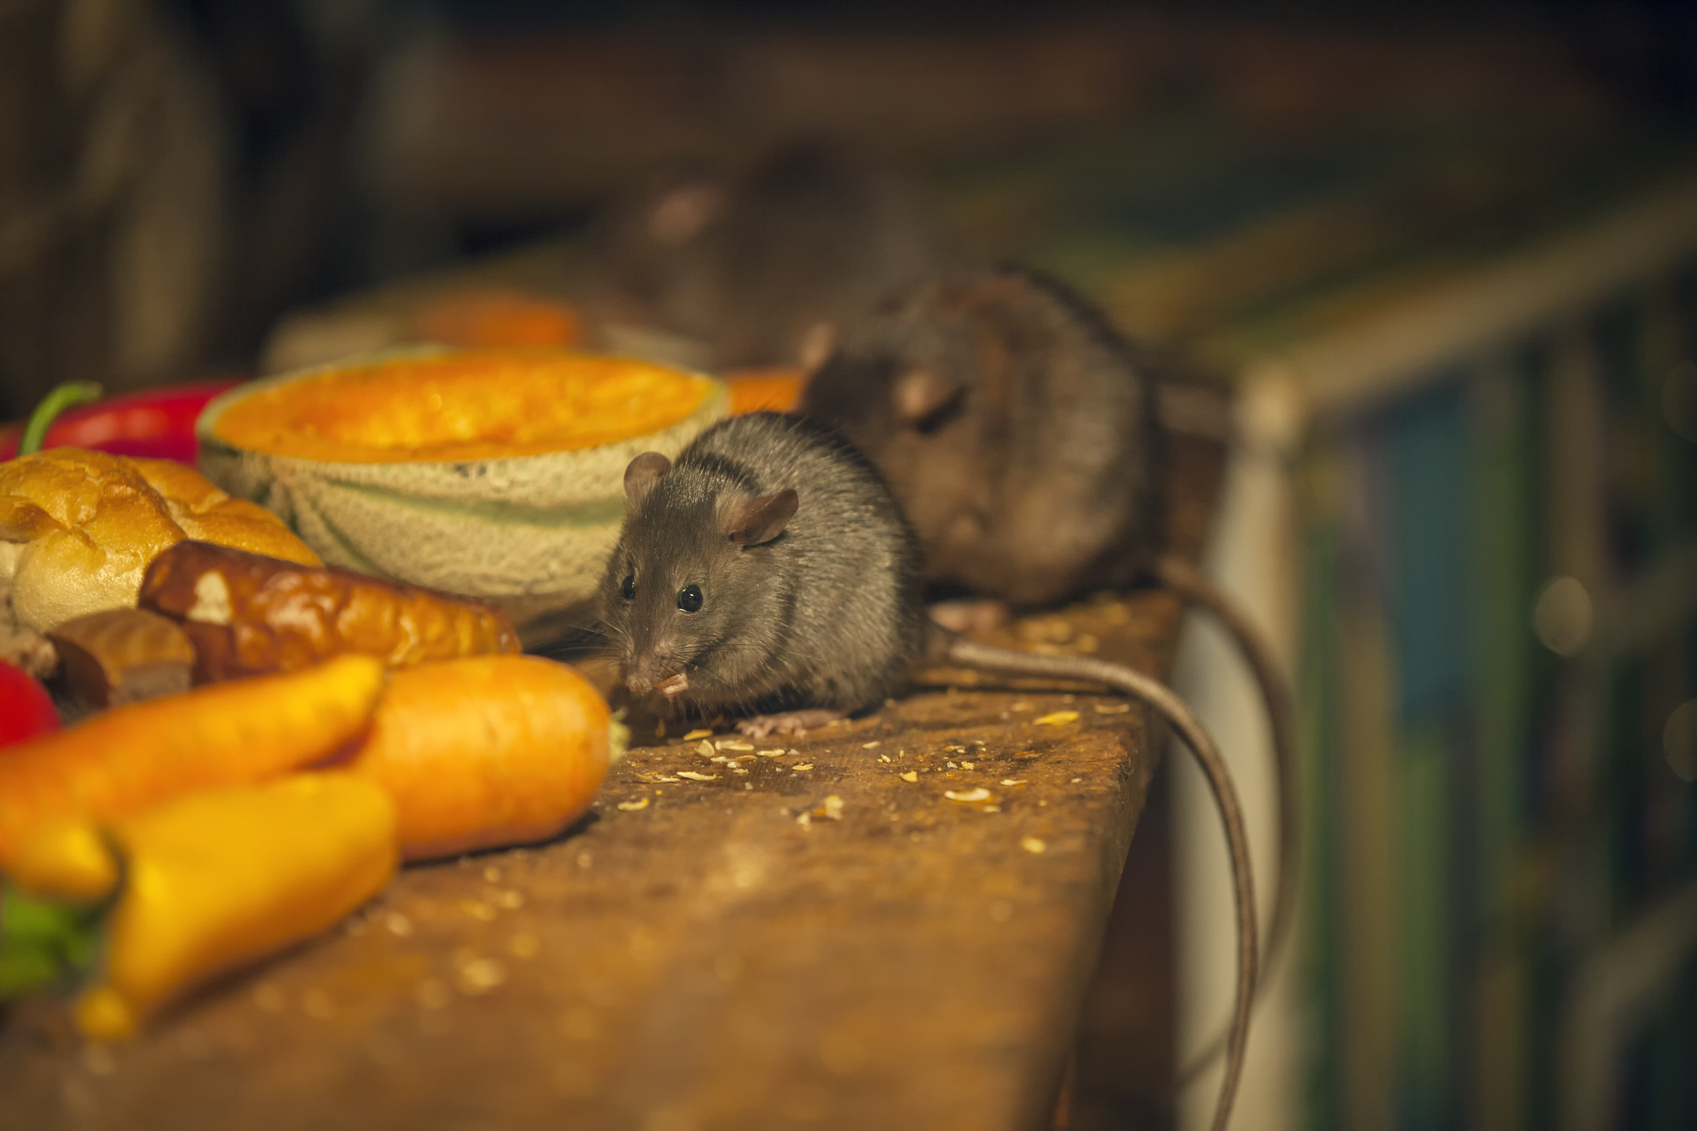 COUNCIL THREATENS TO SHUT DOWN HOUSE BECAUSE OF RATS